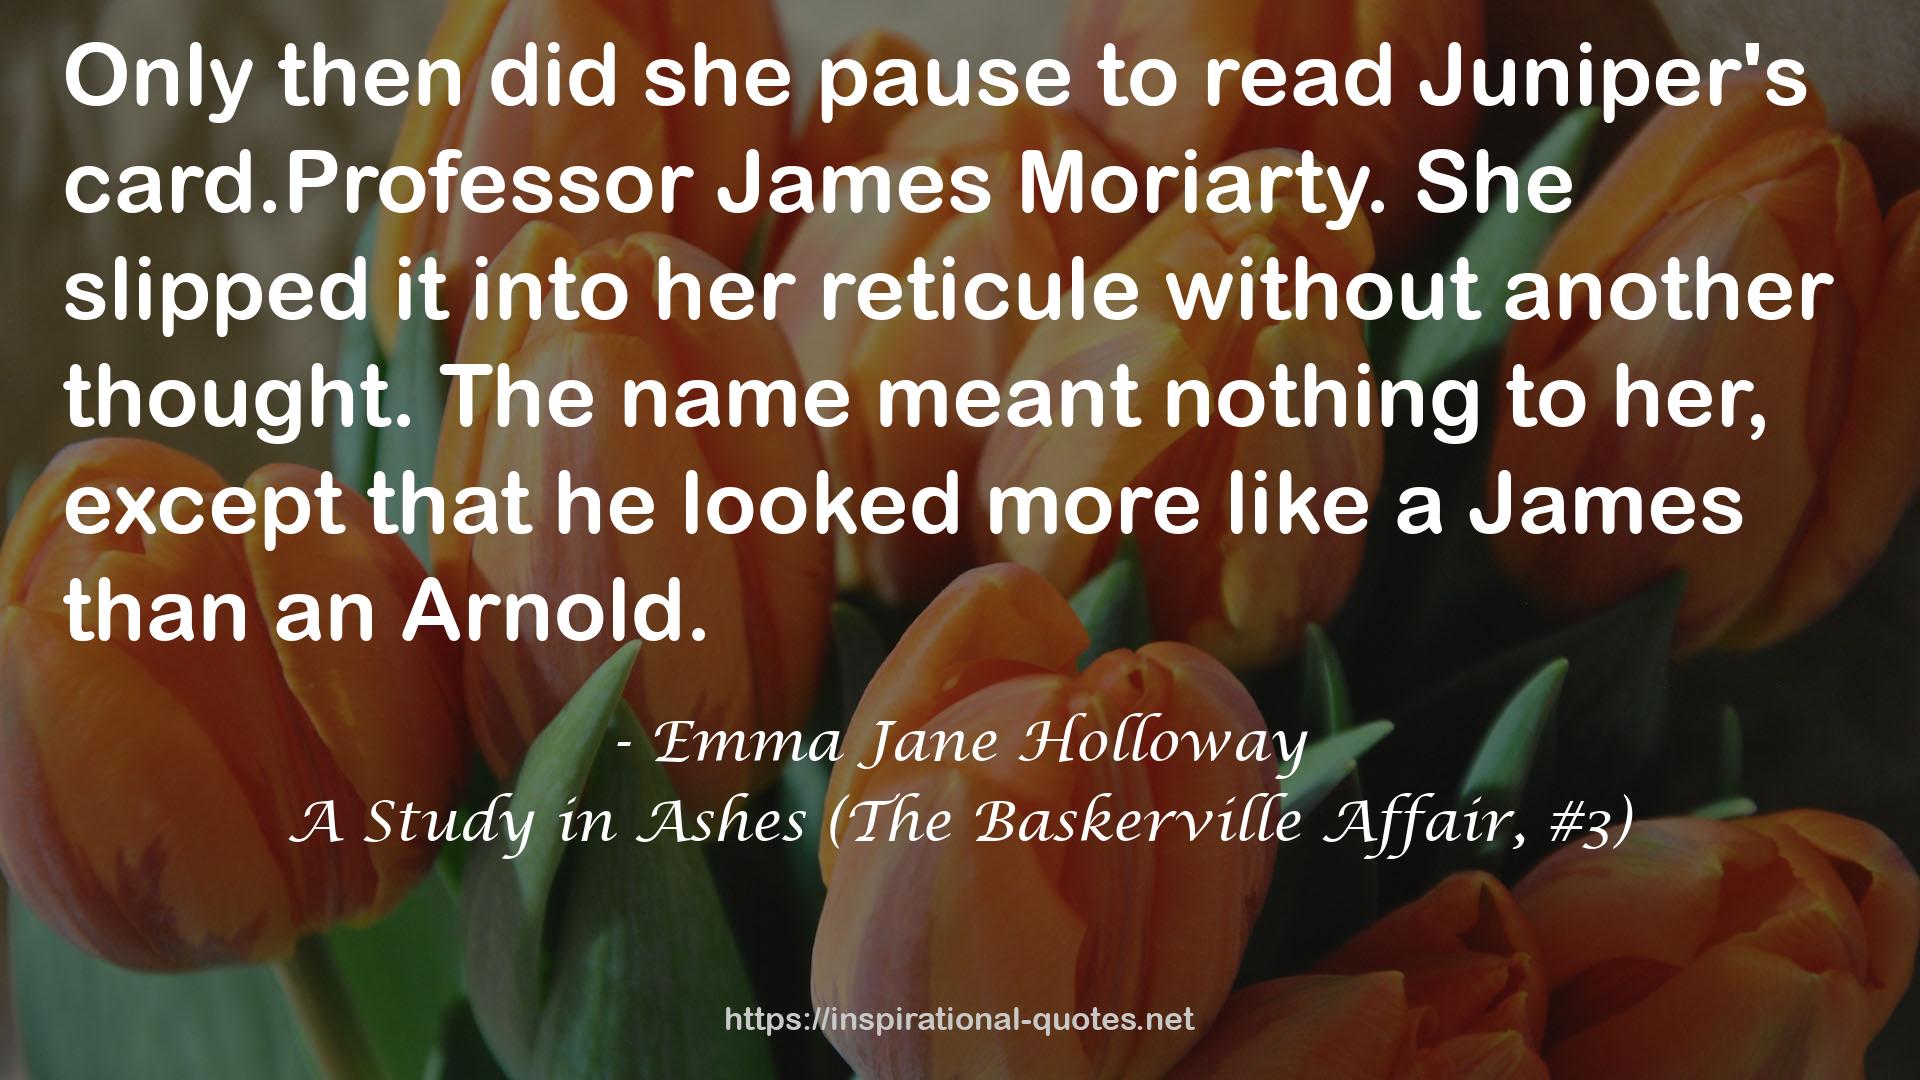 A Study in Ashes (The Baskerville Affair, #3) QUOTES